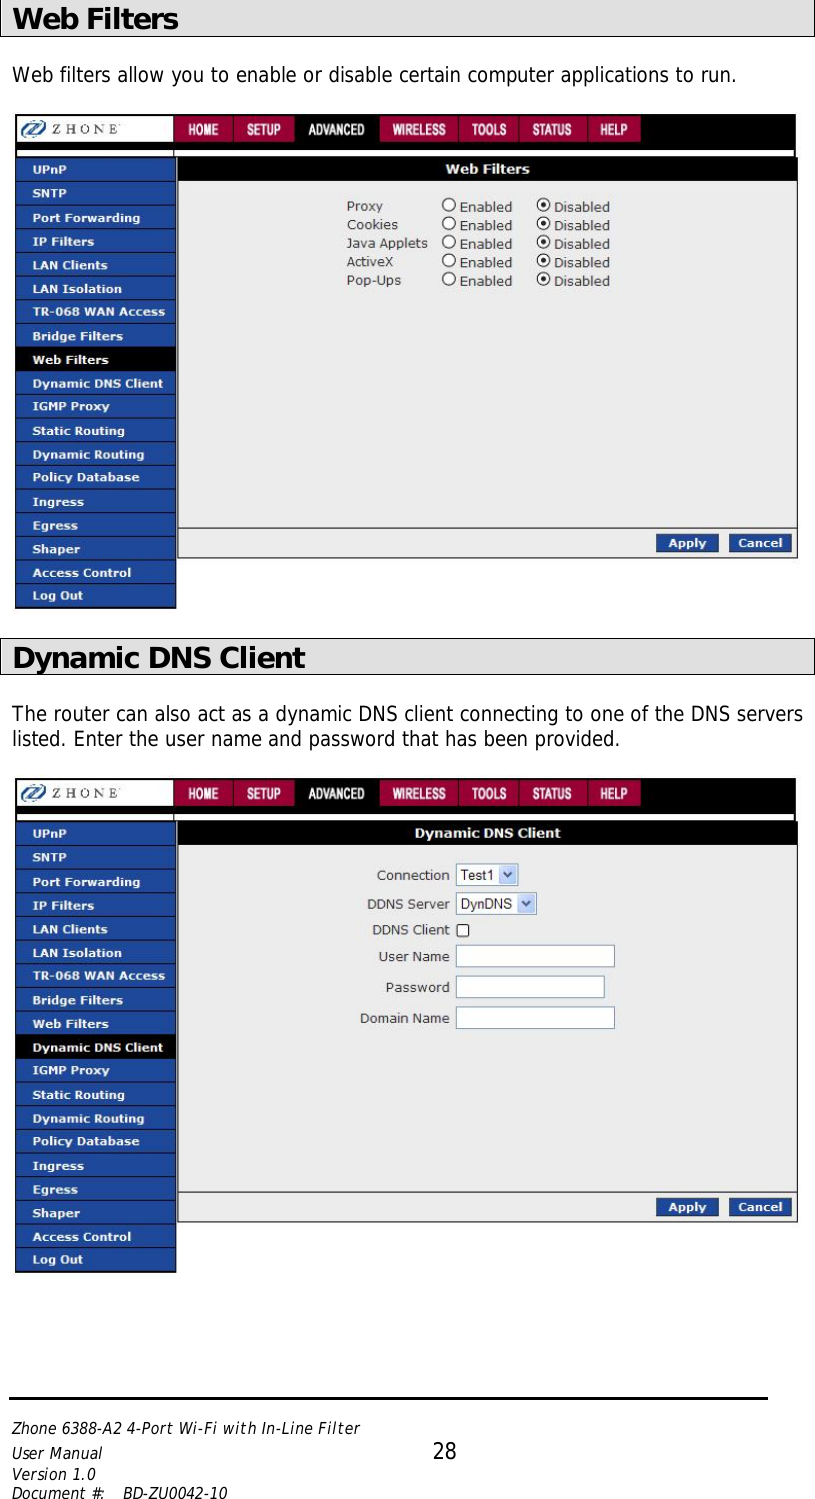   Zhone 6388-A2 4-Port Wi-Fi with In-Line Filter User Manual 28 Version 1.0 Document #:  BD-ZU0042-10    Web Filters  Web filters allow you to enable or disable certain computer applications to run.     Dynamic DNS Client  The router can also act as a dynamic DNS client connecting to one of the DNS servers listed. Enter the user name and password that has been provided.   